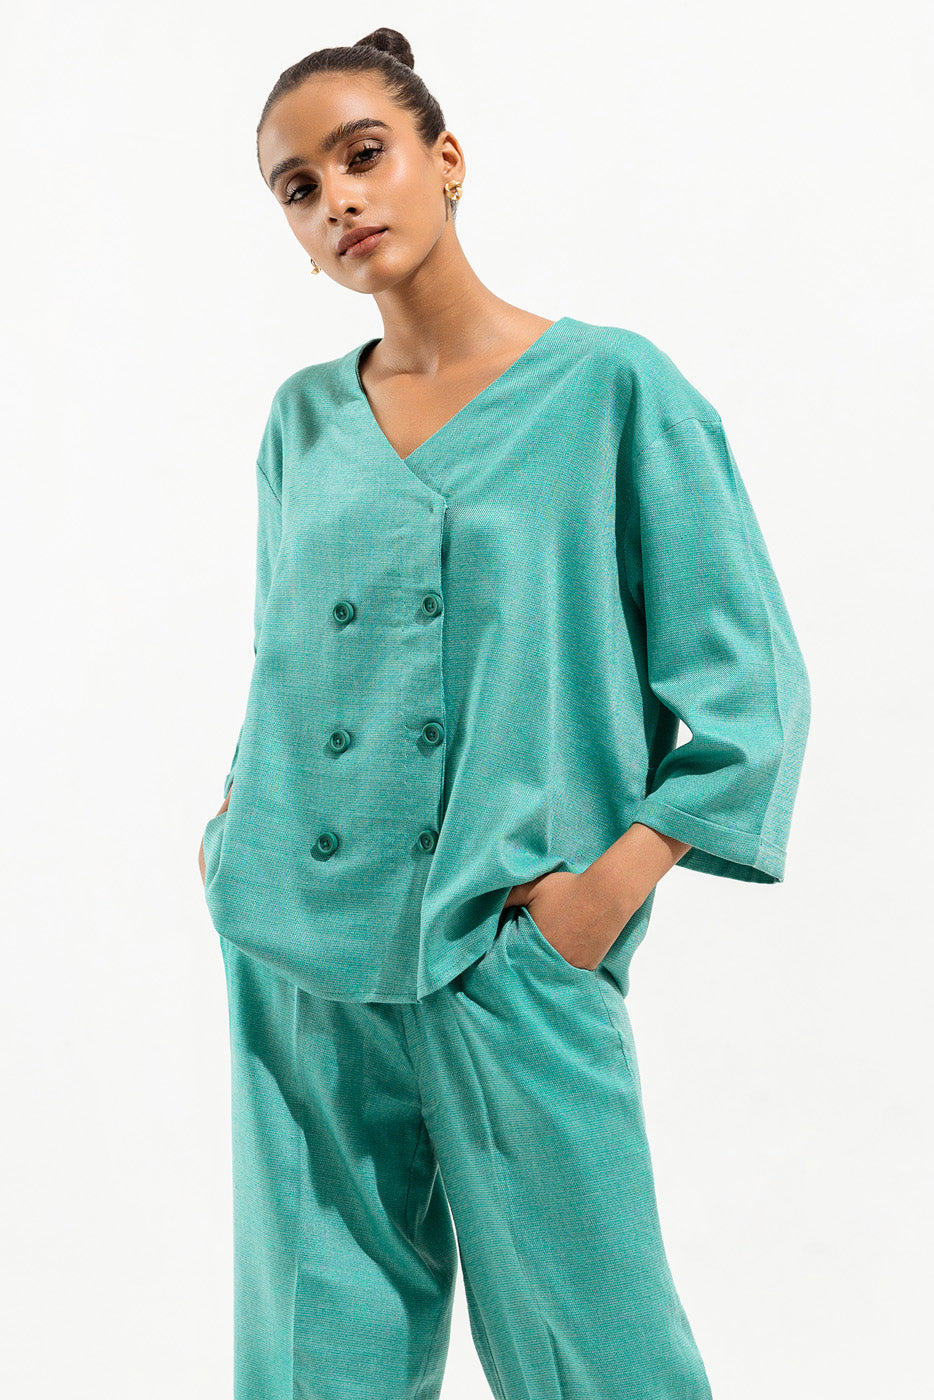 Turquoise Buttoned Co-ord set - BEECHTREE